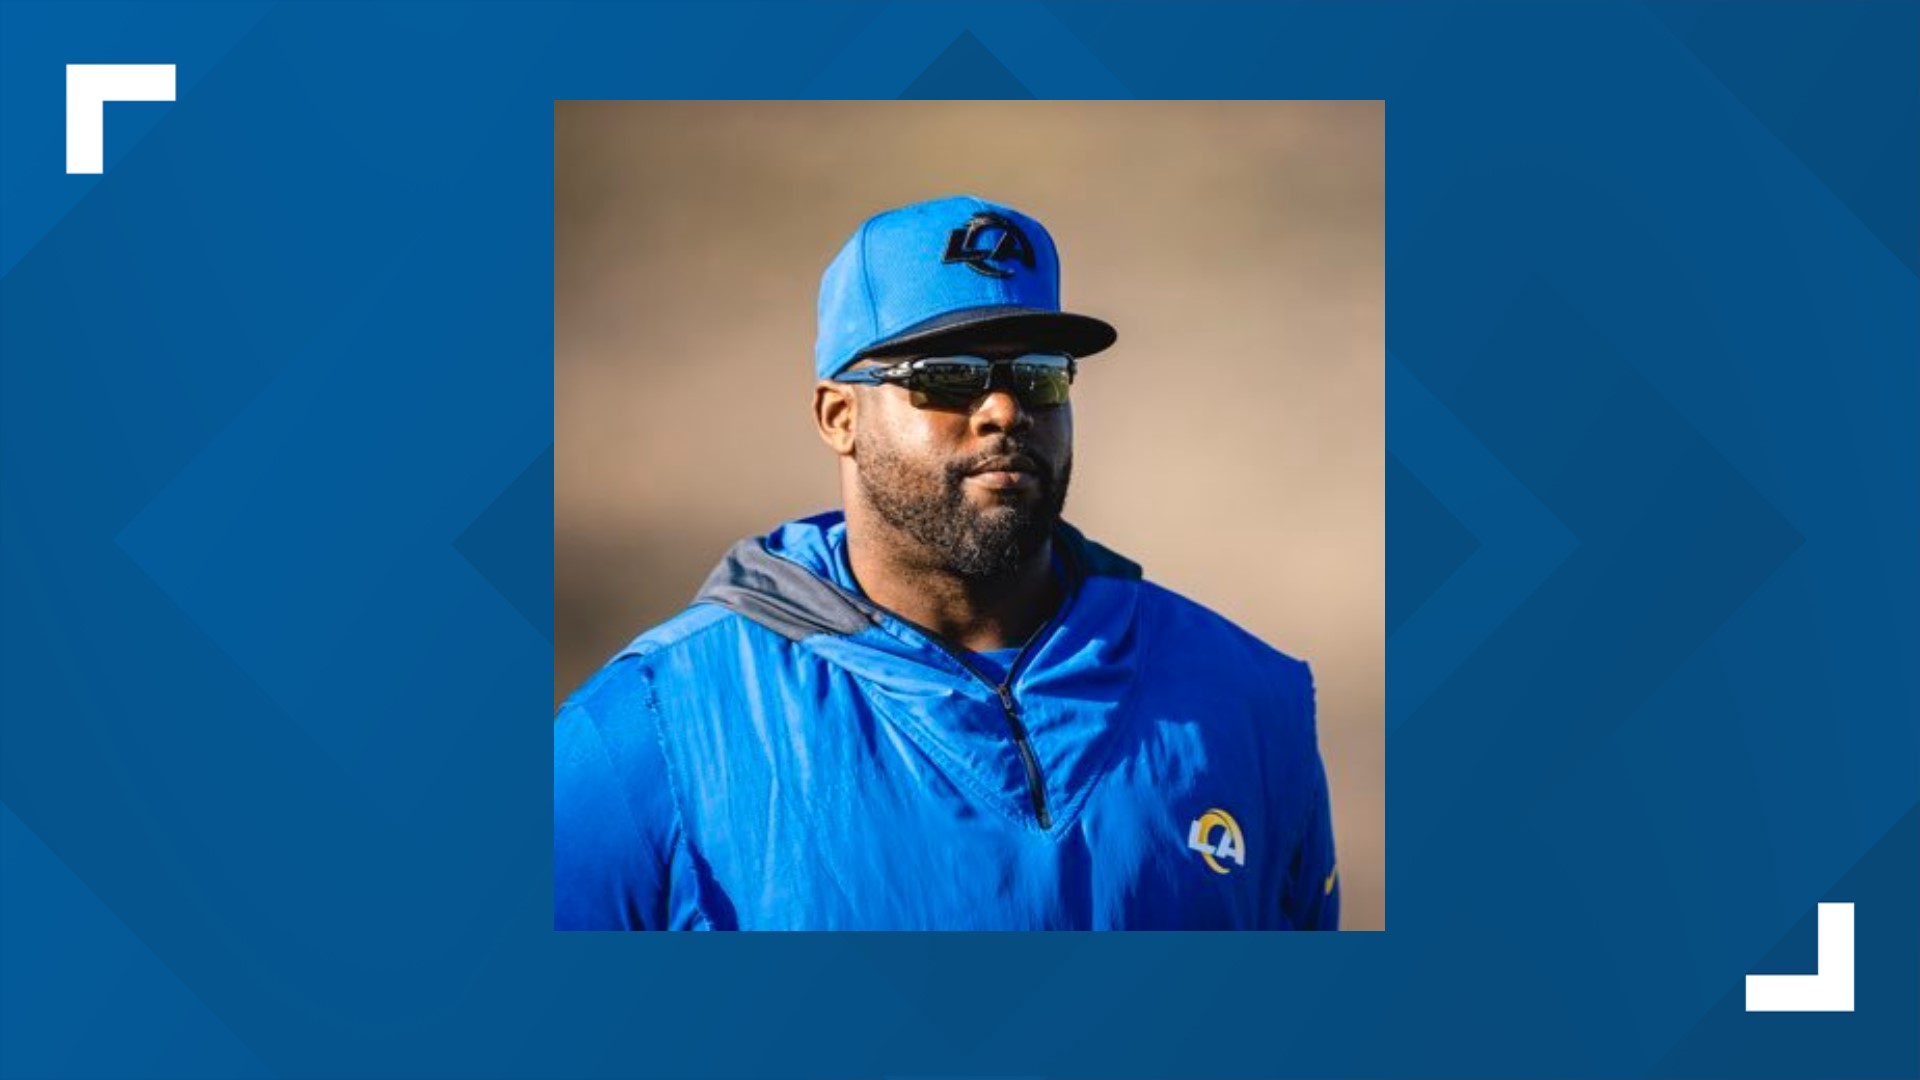 Former Hampton Pirates player and coach, Marcus Dixon is an assistant defensive line coach in his first season with the Los Angeles Rams.